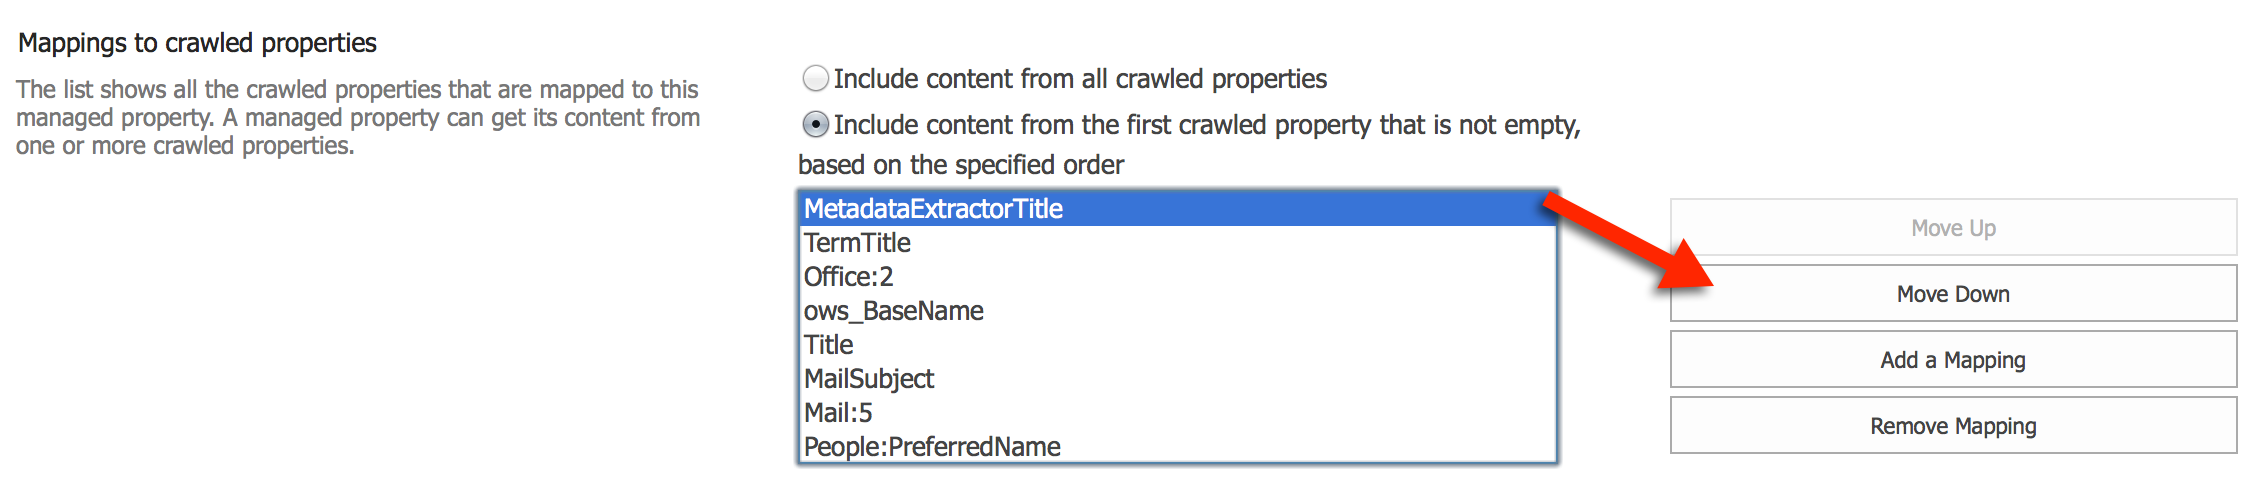 Understand SharePoint Crawled and Managed properties for search